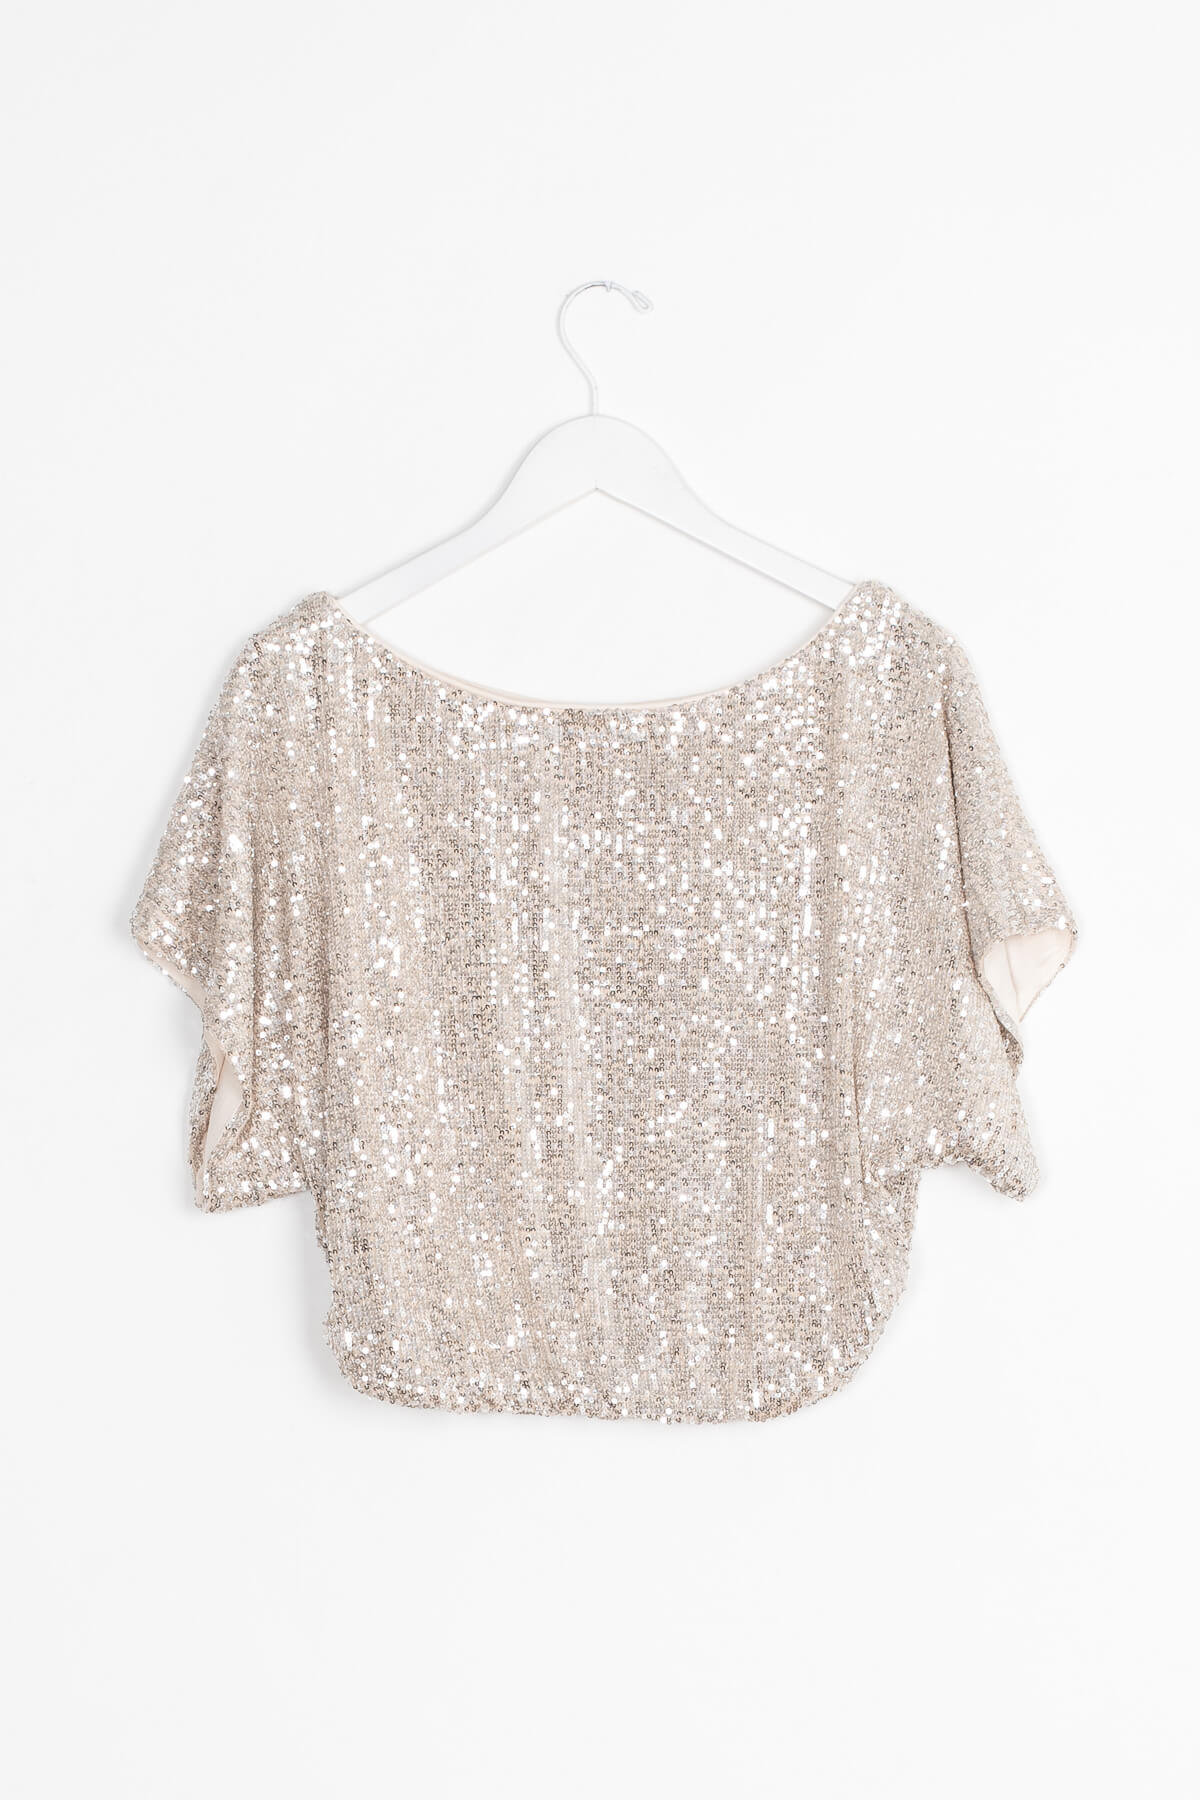 Silver off the shoulder sequin top